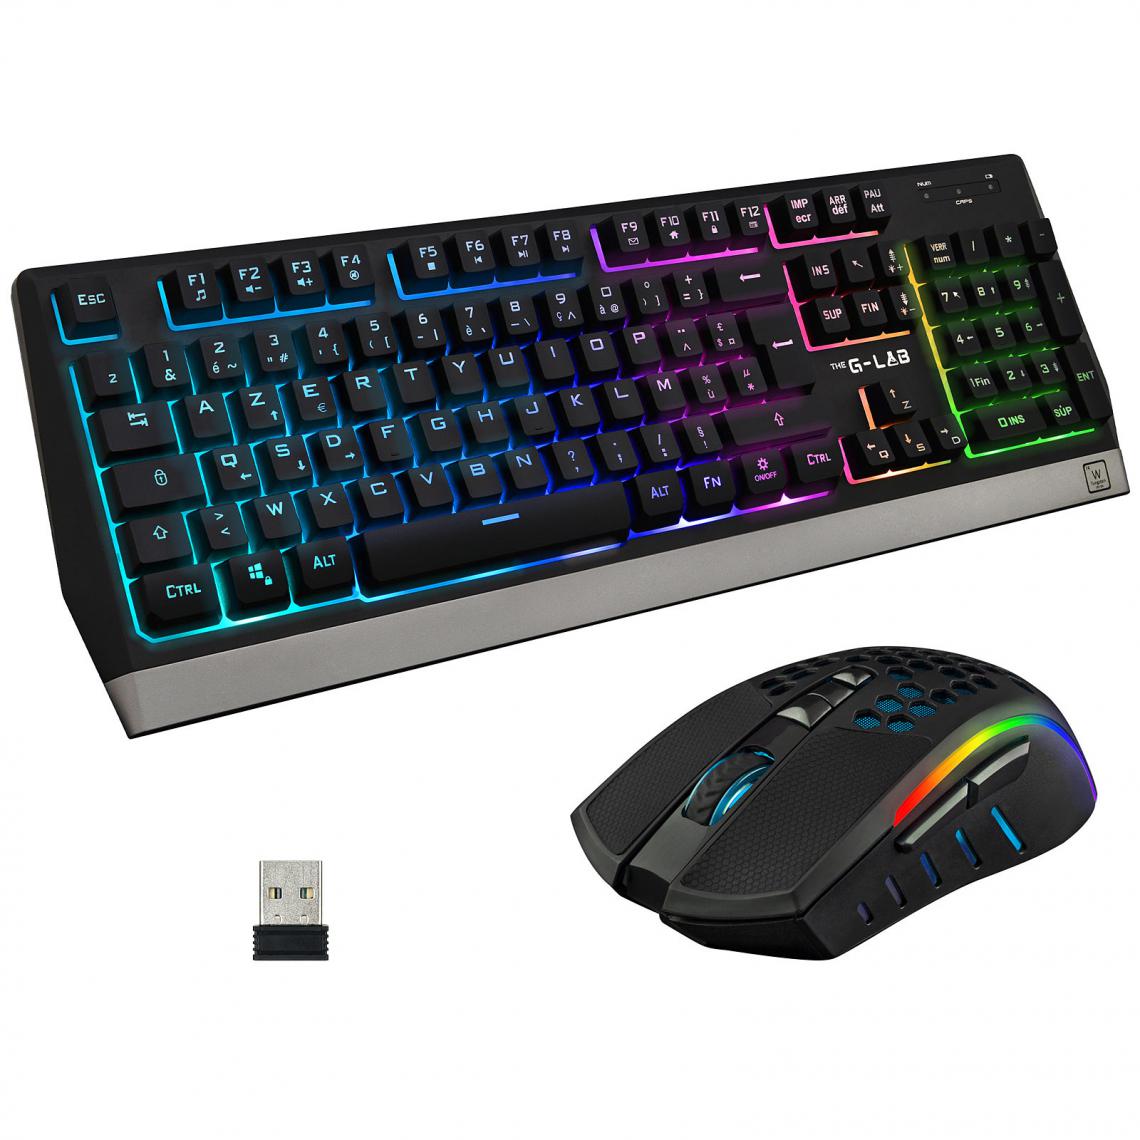 The G-Lab - Combo Tungsten (ES) - Pack Clavier Souris